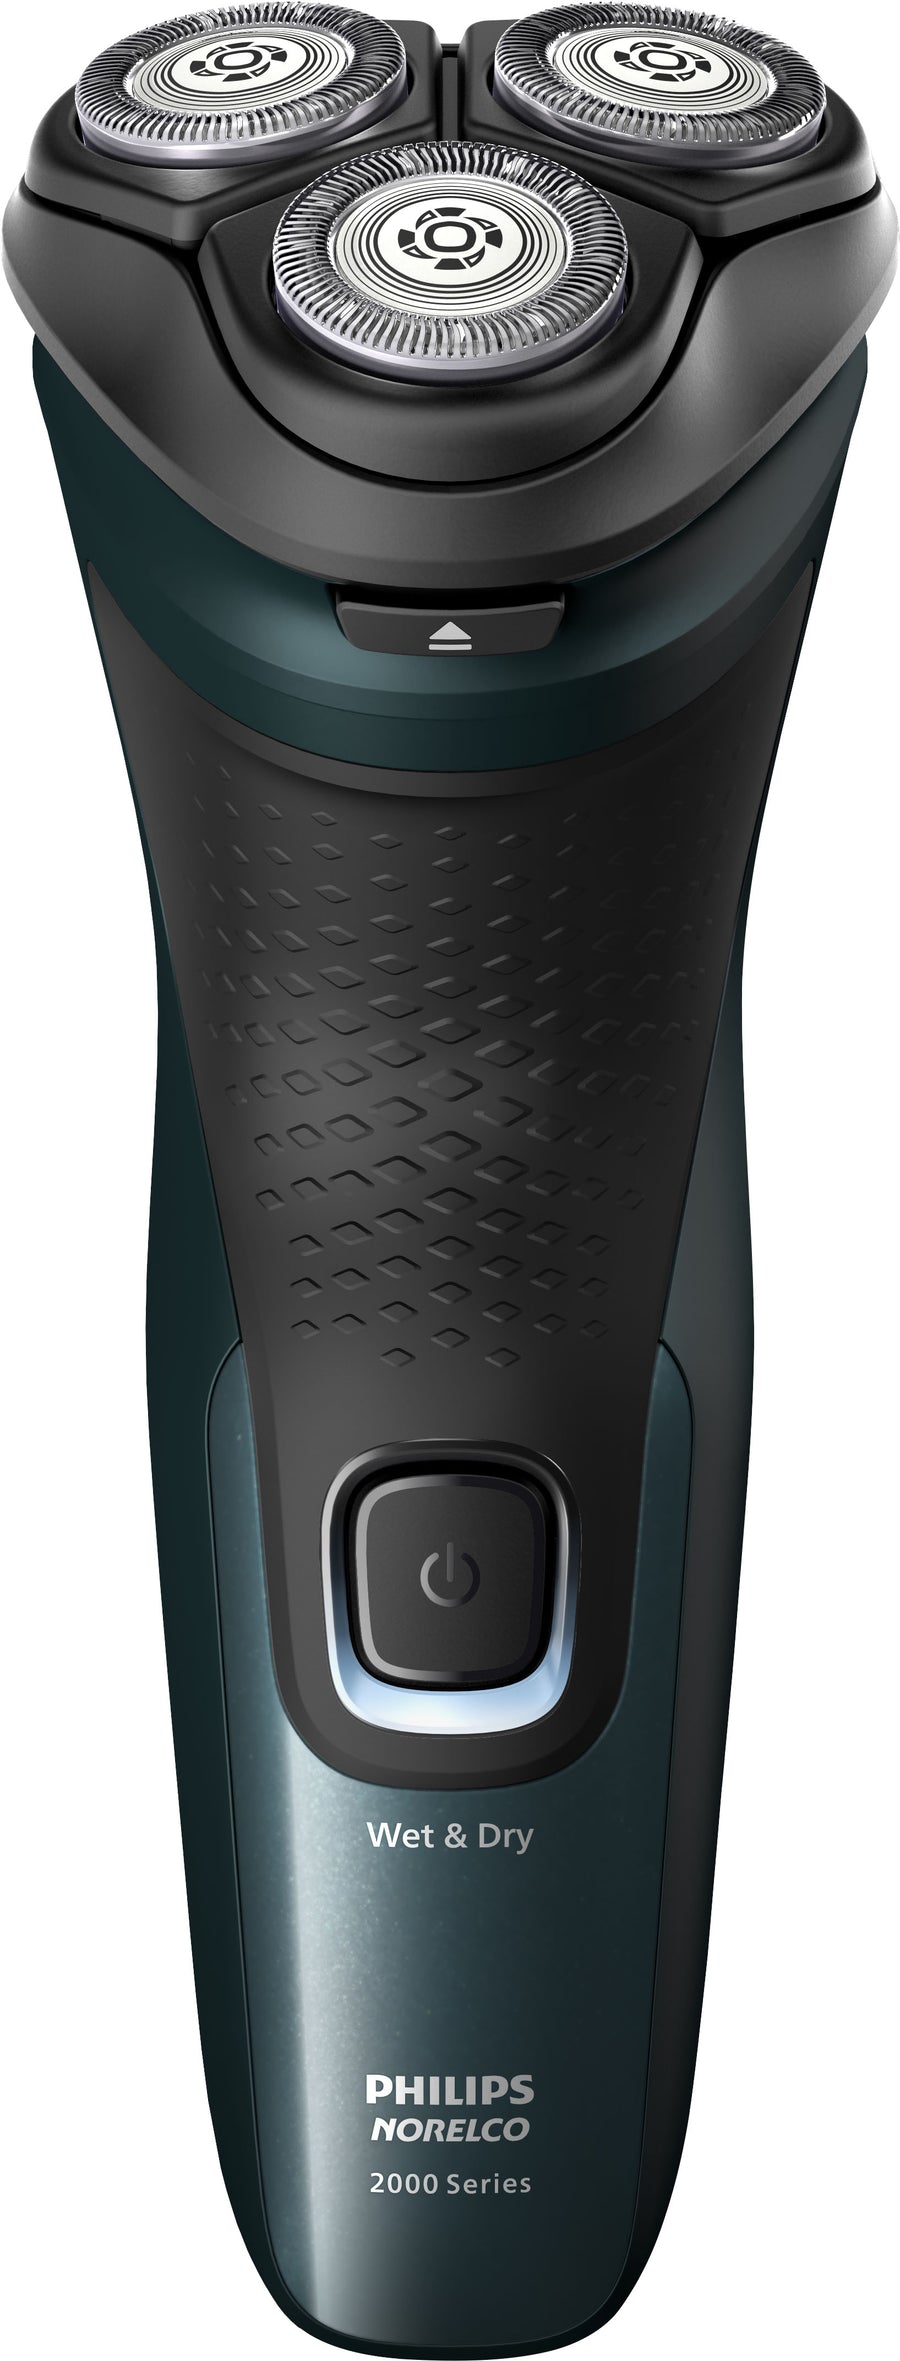 Philips Norelco Series 2600 Rechargeable Wet/Dry Electric Shaver - Forest Green_0